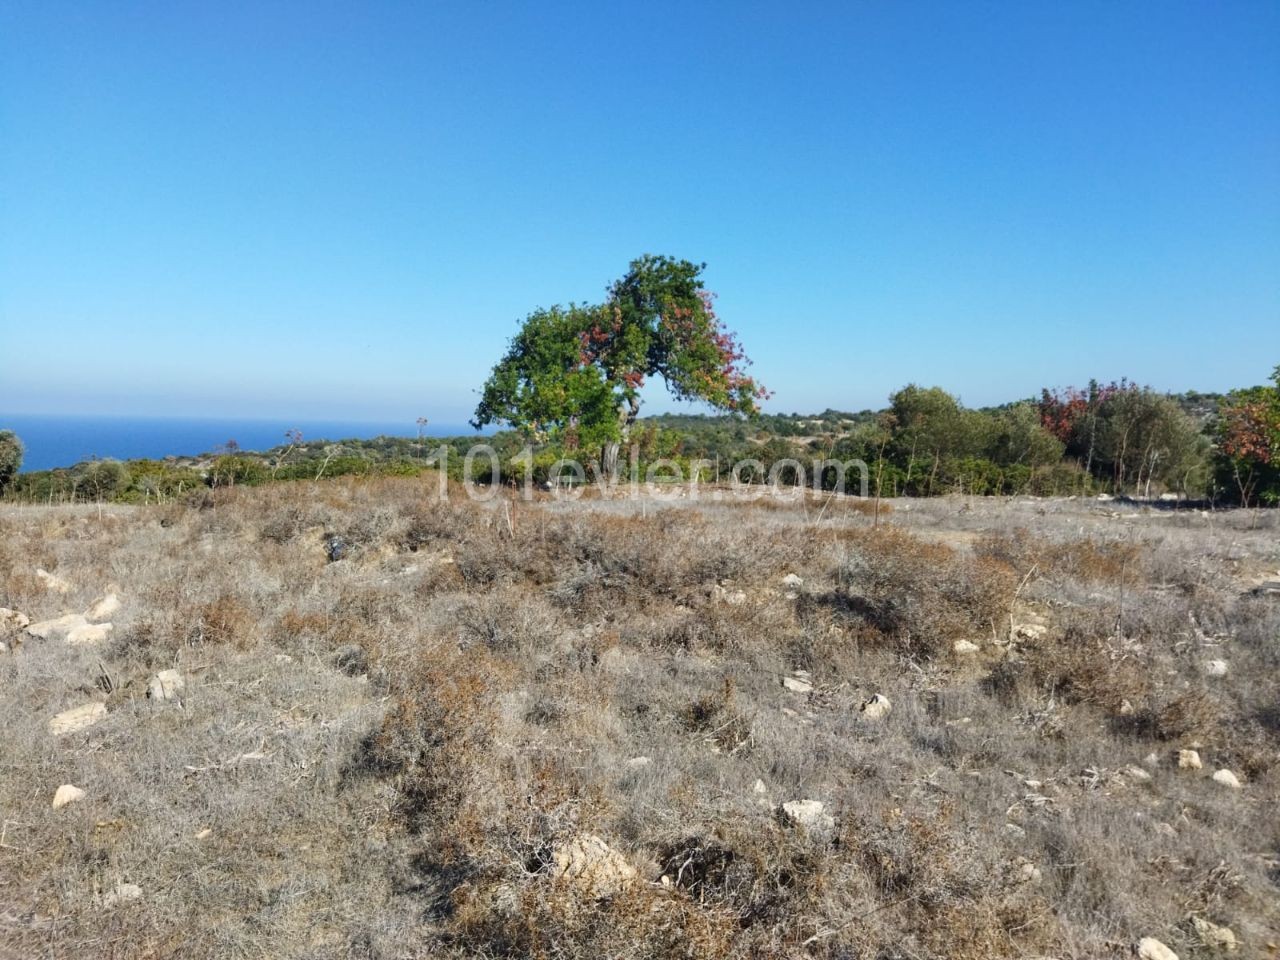 Residential Zoned Plot For Sale in Sipahi, Iskele